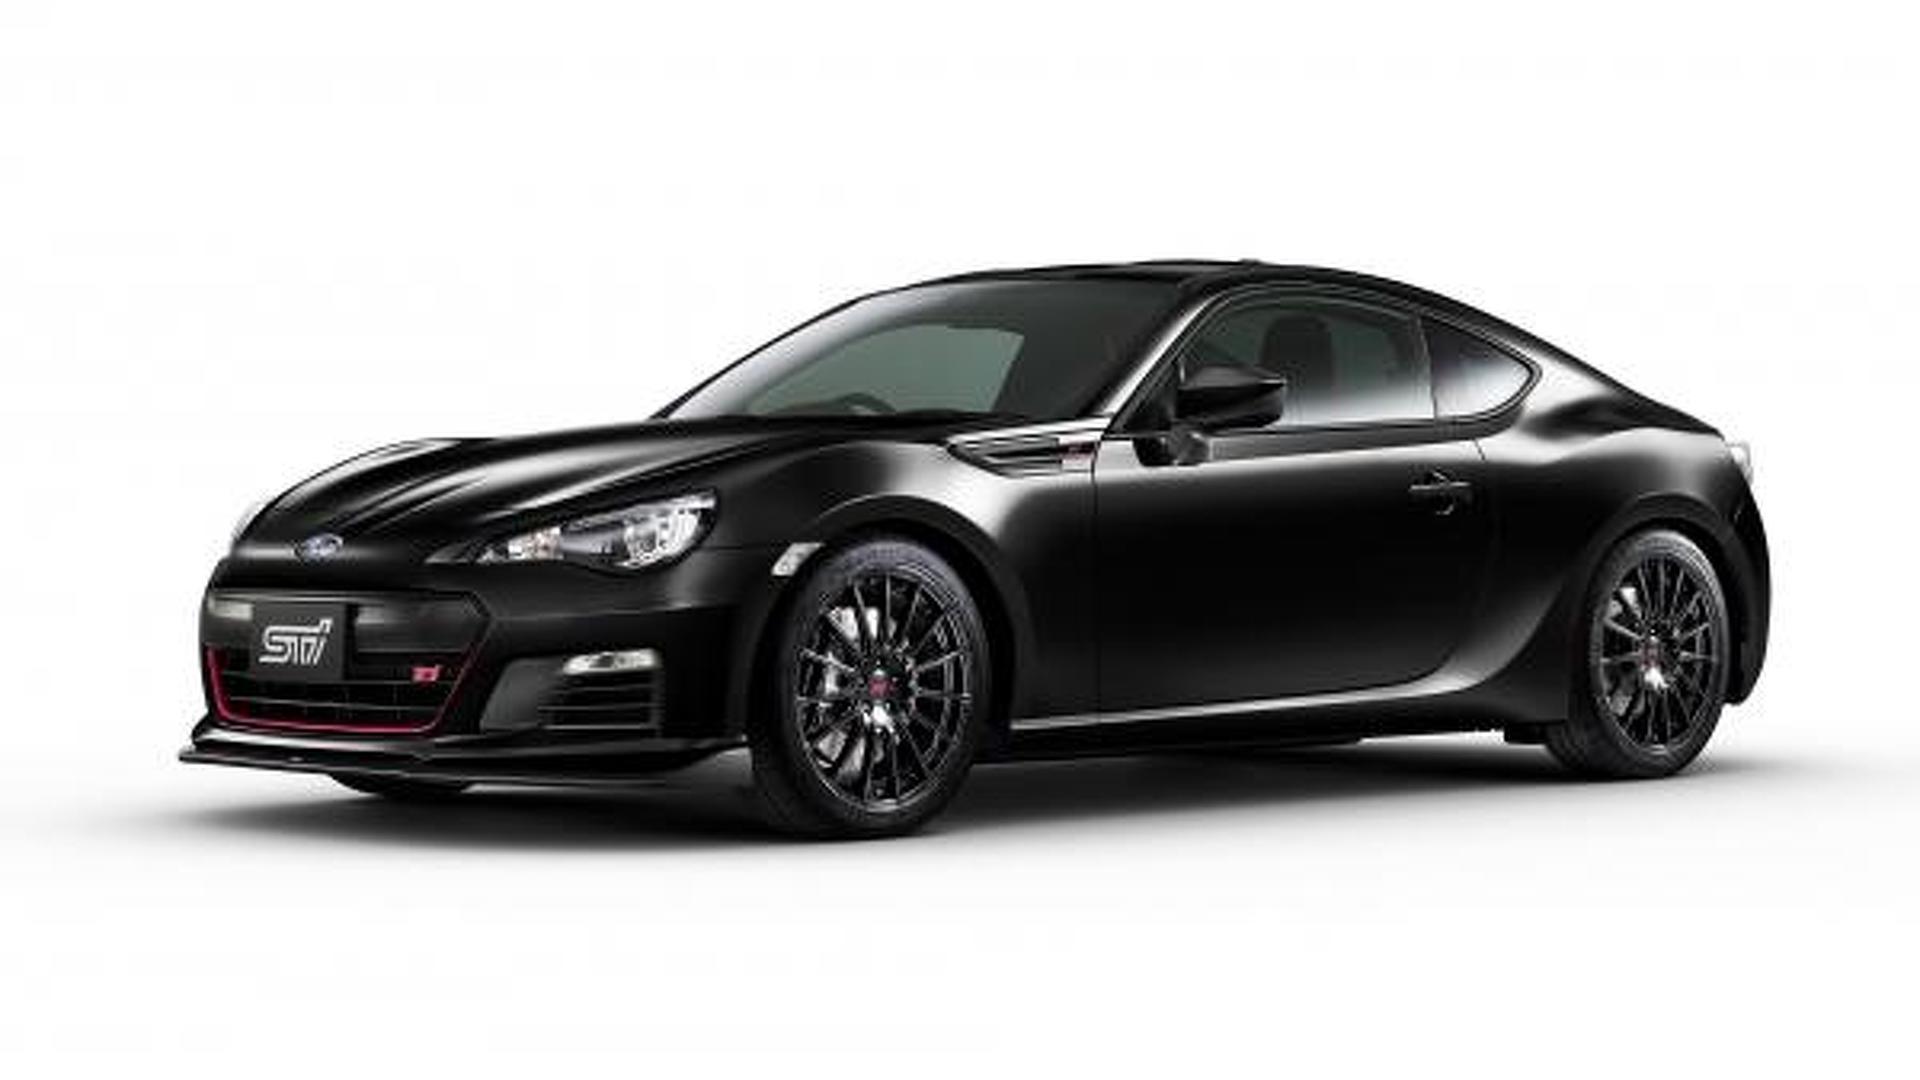 2015 Subaru BRZ tS STI launched in Japan with several mechanical upgrades